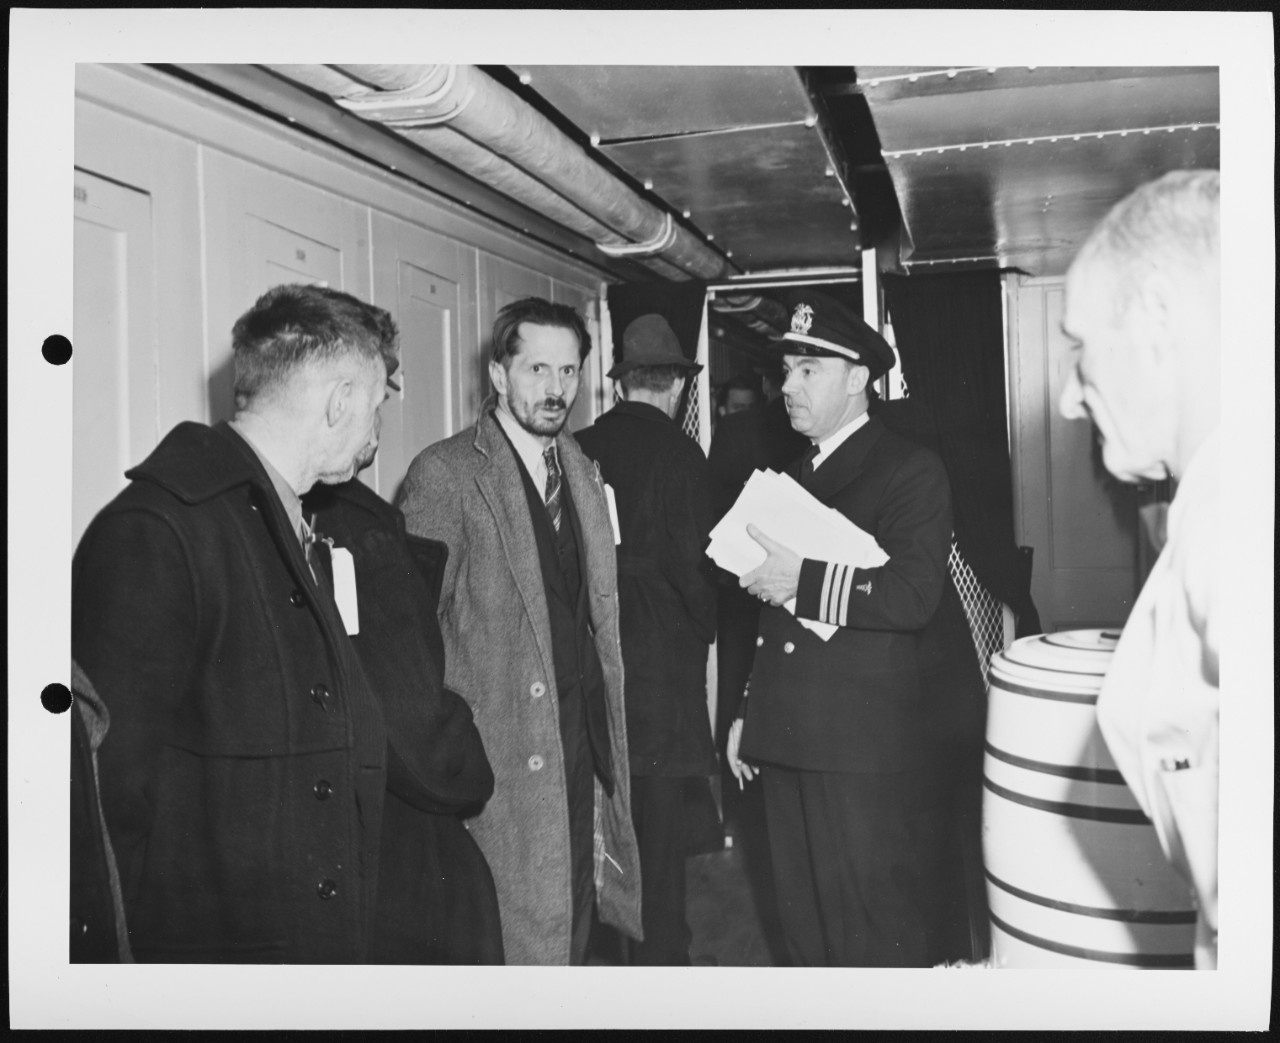 Swedish Exchange Ship GRIPSHOLM sails from New York with German Prisoners of War, February 15, 1944